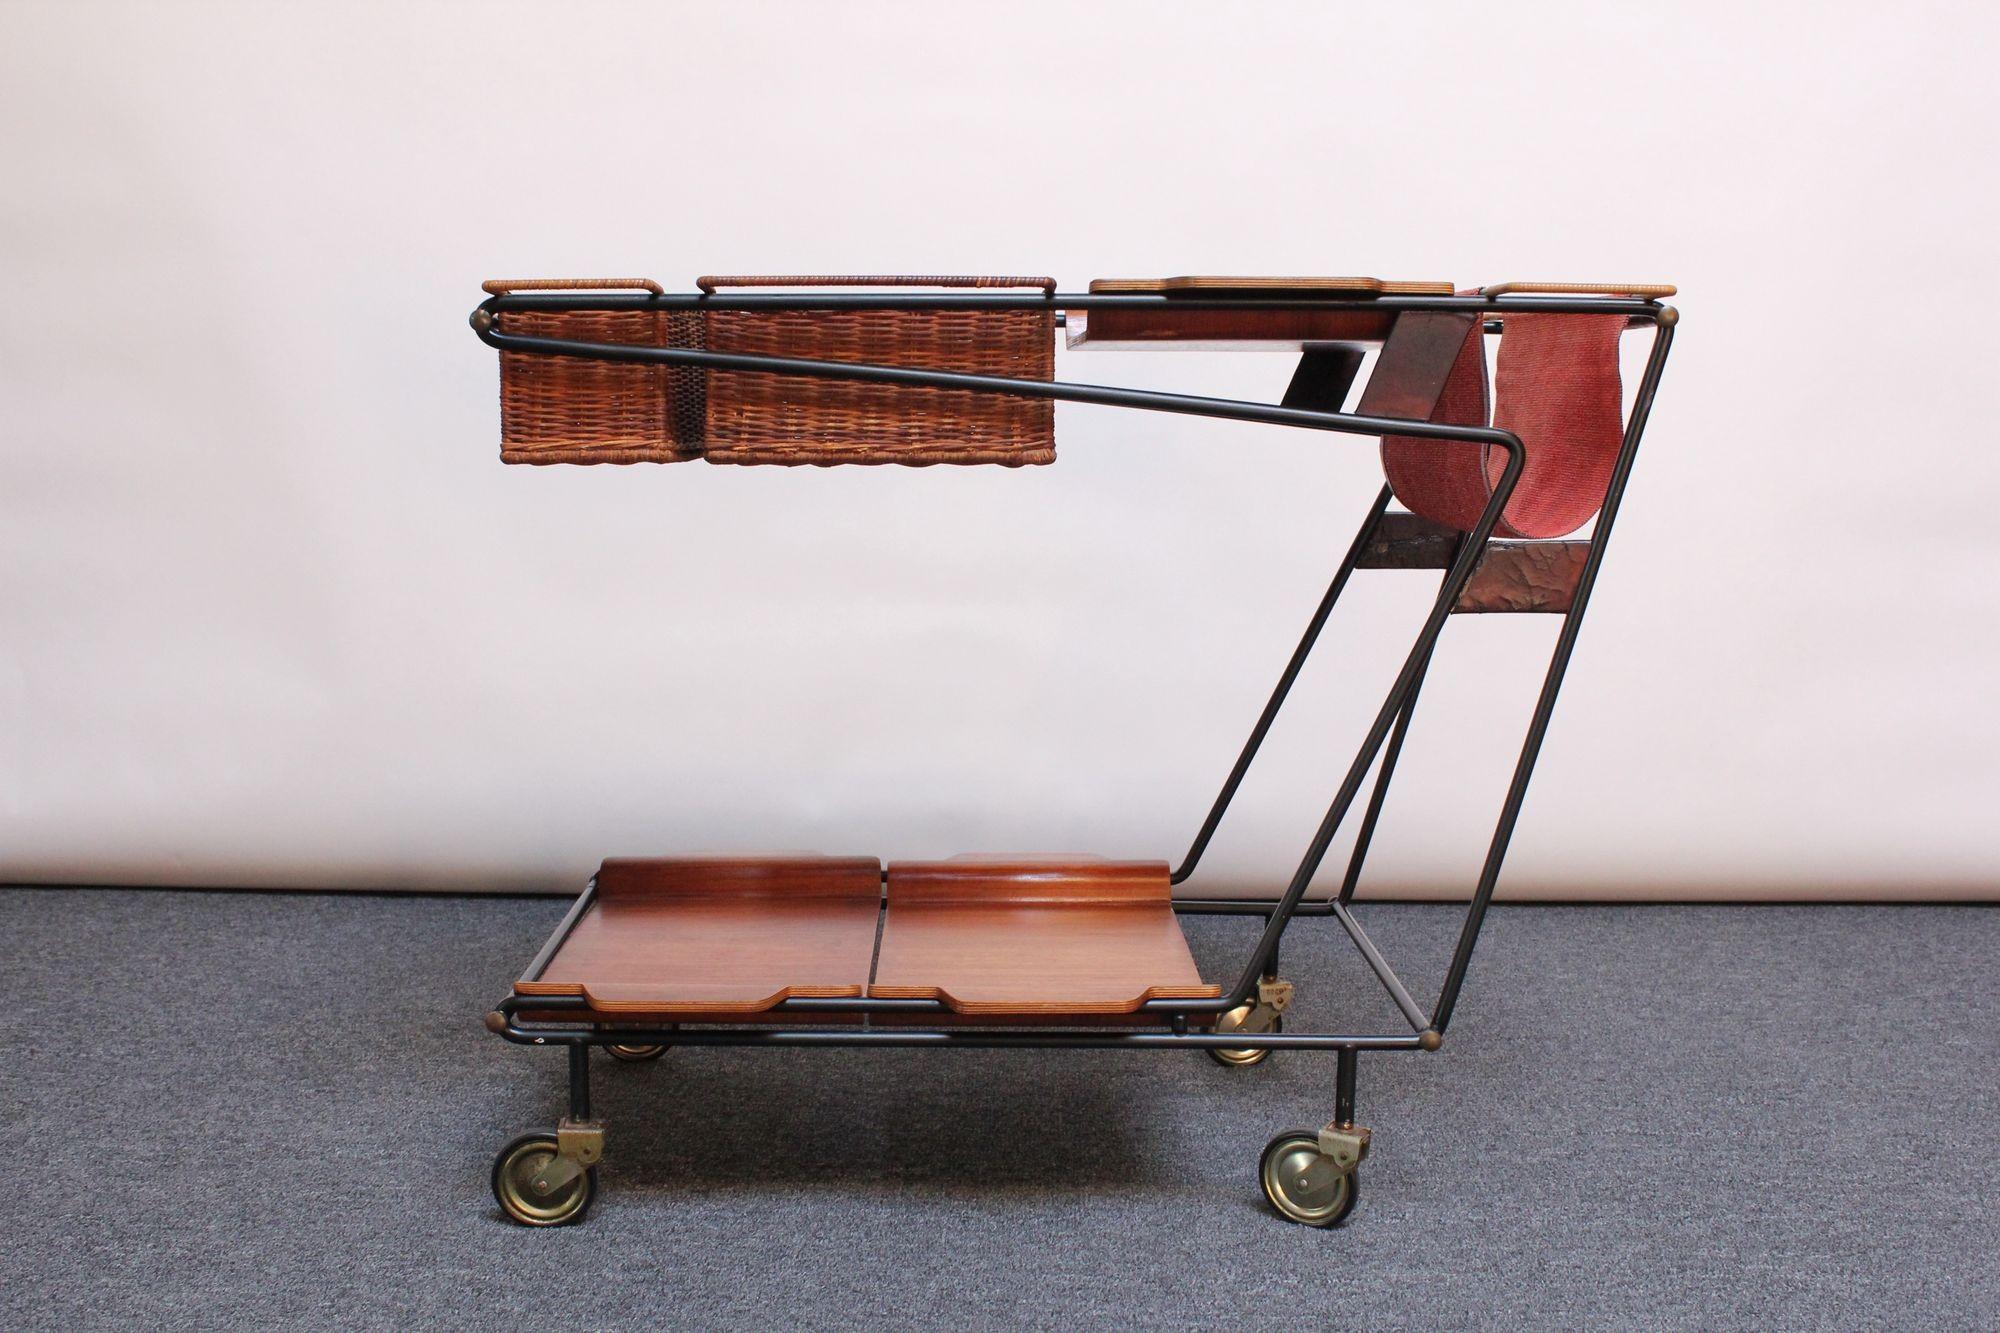 Italian Modernist Iron Bar Cart / Trolley with Plywood and Wicker Inserts In Good Condition For Sale In Brooklyn, NY